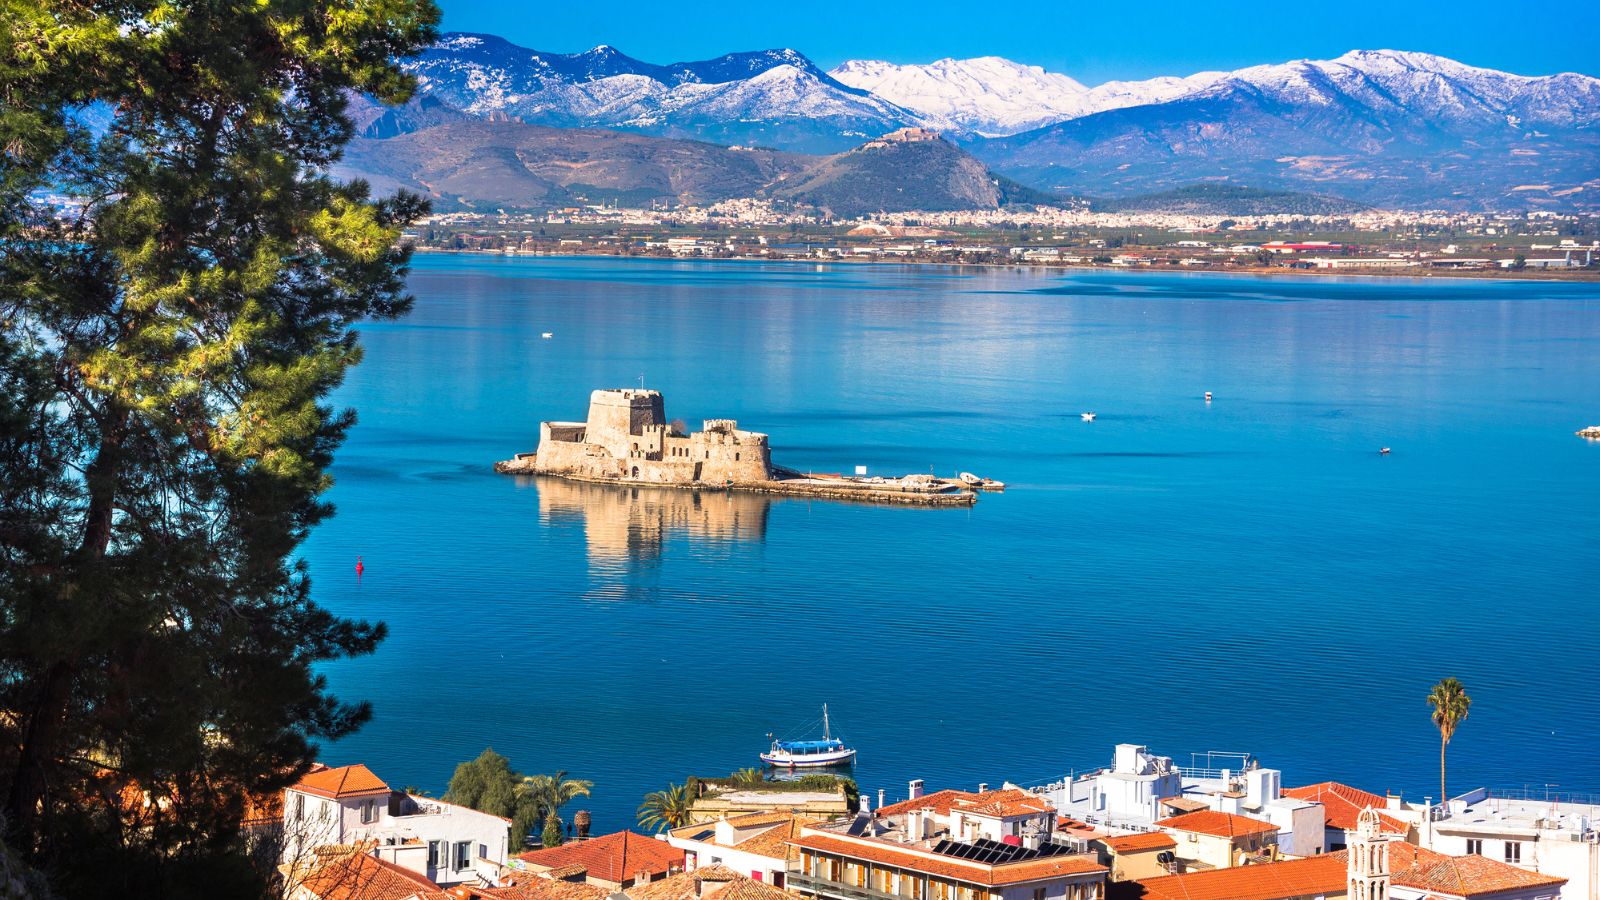 <p><span>The beauty of Nafplio will take your breath away. There are three stunning castles to explore: Palamidi, Acronafplia, and the unique Bourtzi, surrounded by the sea. It’s accessible by a lovely walk down the harbor and is open to visitors during the day.</span></p><p><span>Nafplio New Town is famous for shopping, but you won’t find tourist tat. Every shop is teeming with Greek produce or international designer brands. Start at </span><a href="https://www.visitnafplio.com/newtown.html"><span>New Byzantium Town Square</span></a><span>; you’ll find plenty on offer.</span></p><p><span>There are ruins of two ancient cities nearby, Mycenae and Tiryns. Both are </span><span>UNESCO World Heritage sites</span><span>.</span></p>